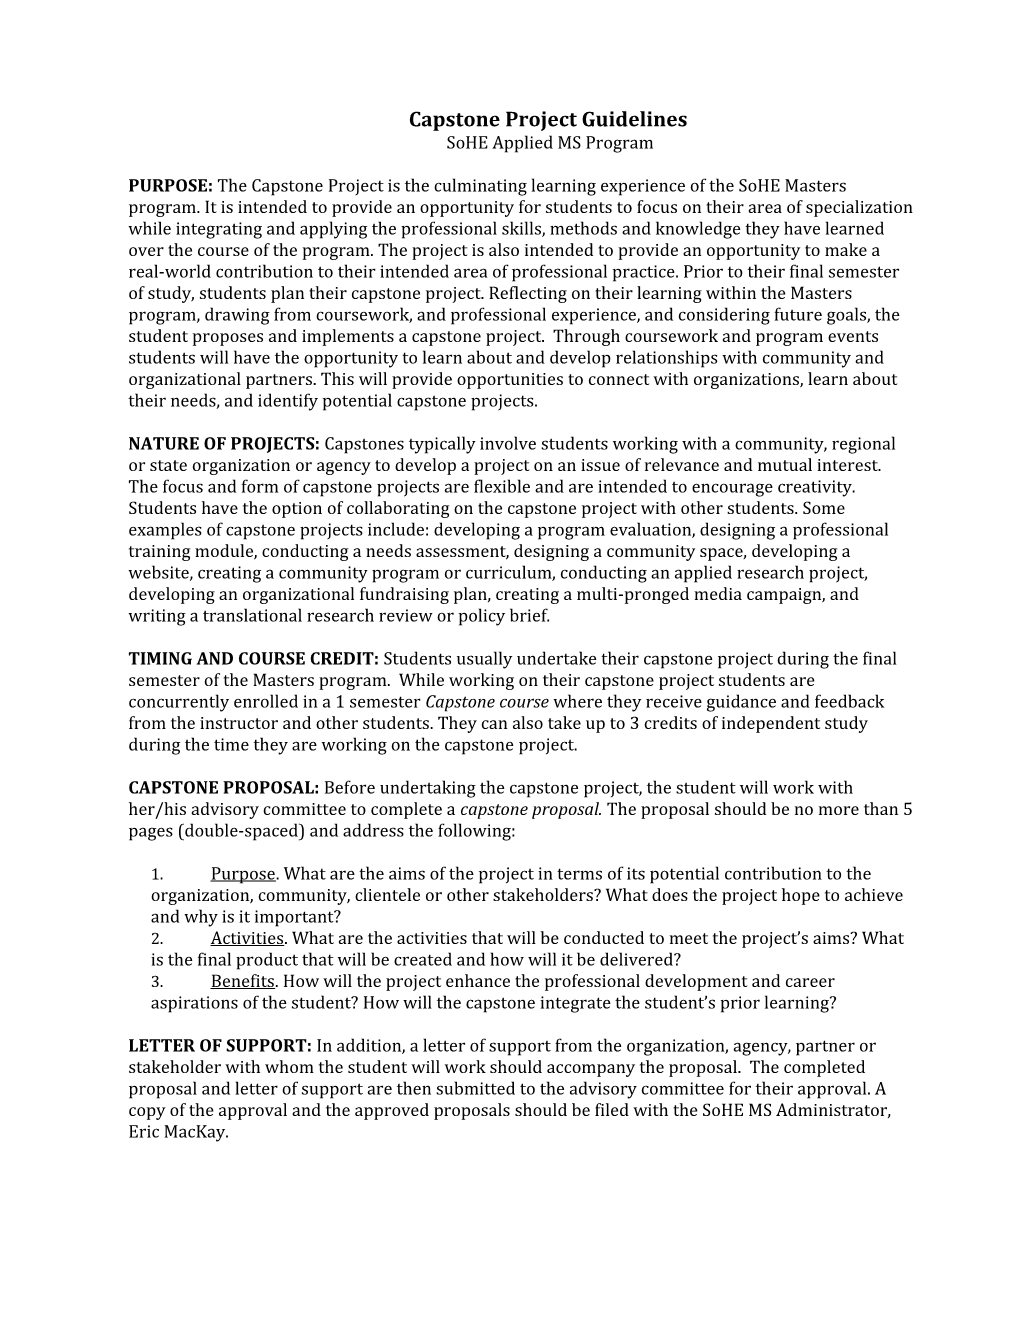 Capstone Project Guidelines Sohe Applied MS Program